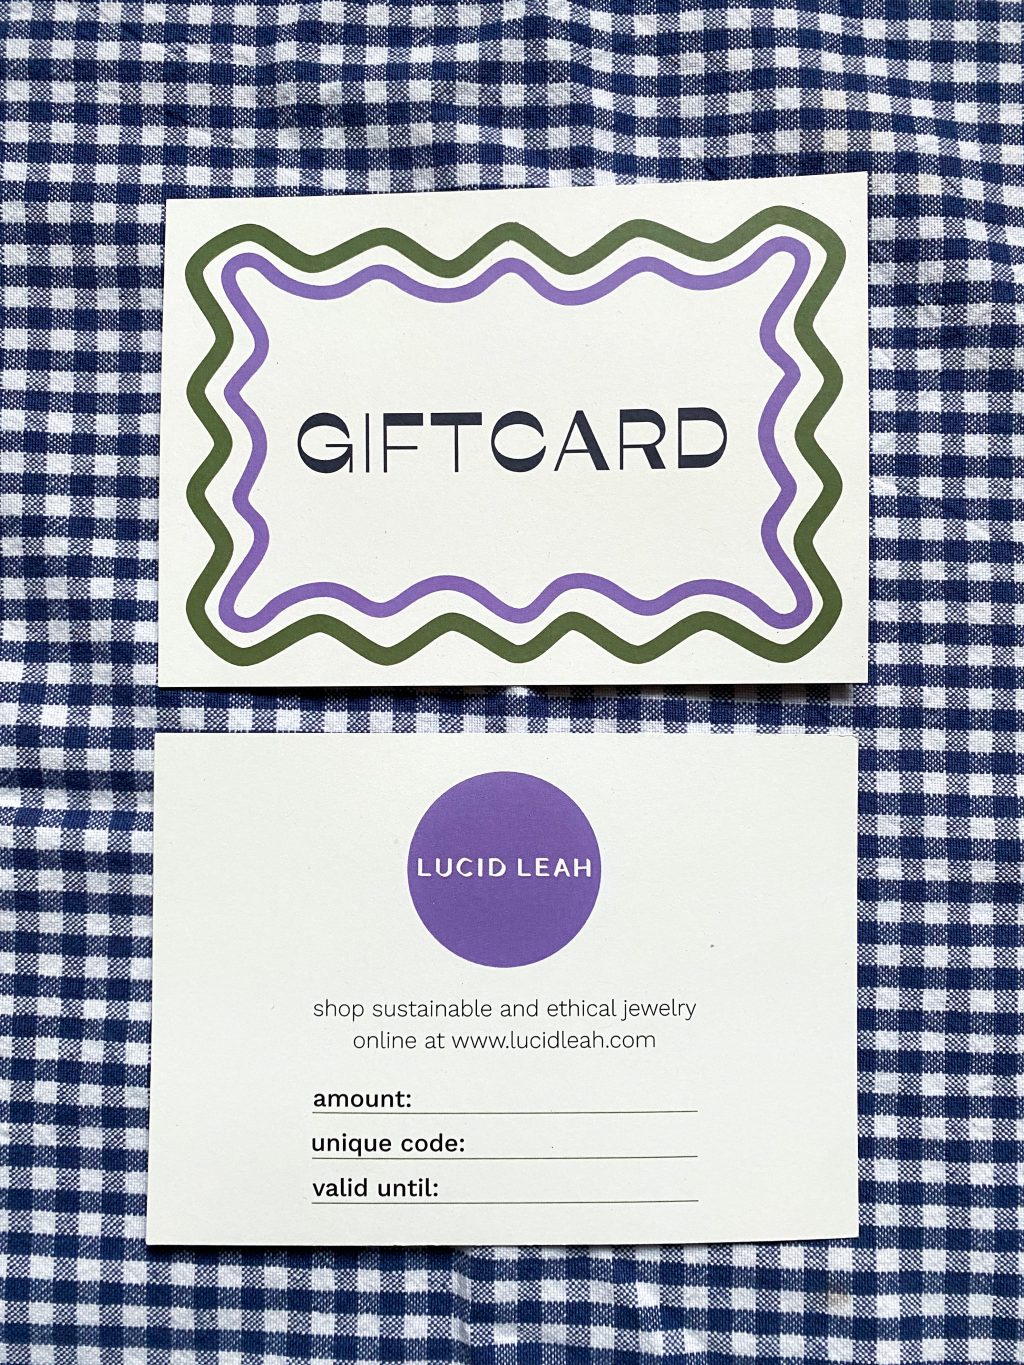 Gift card Lucid Leah front and back